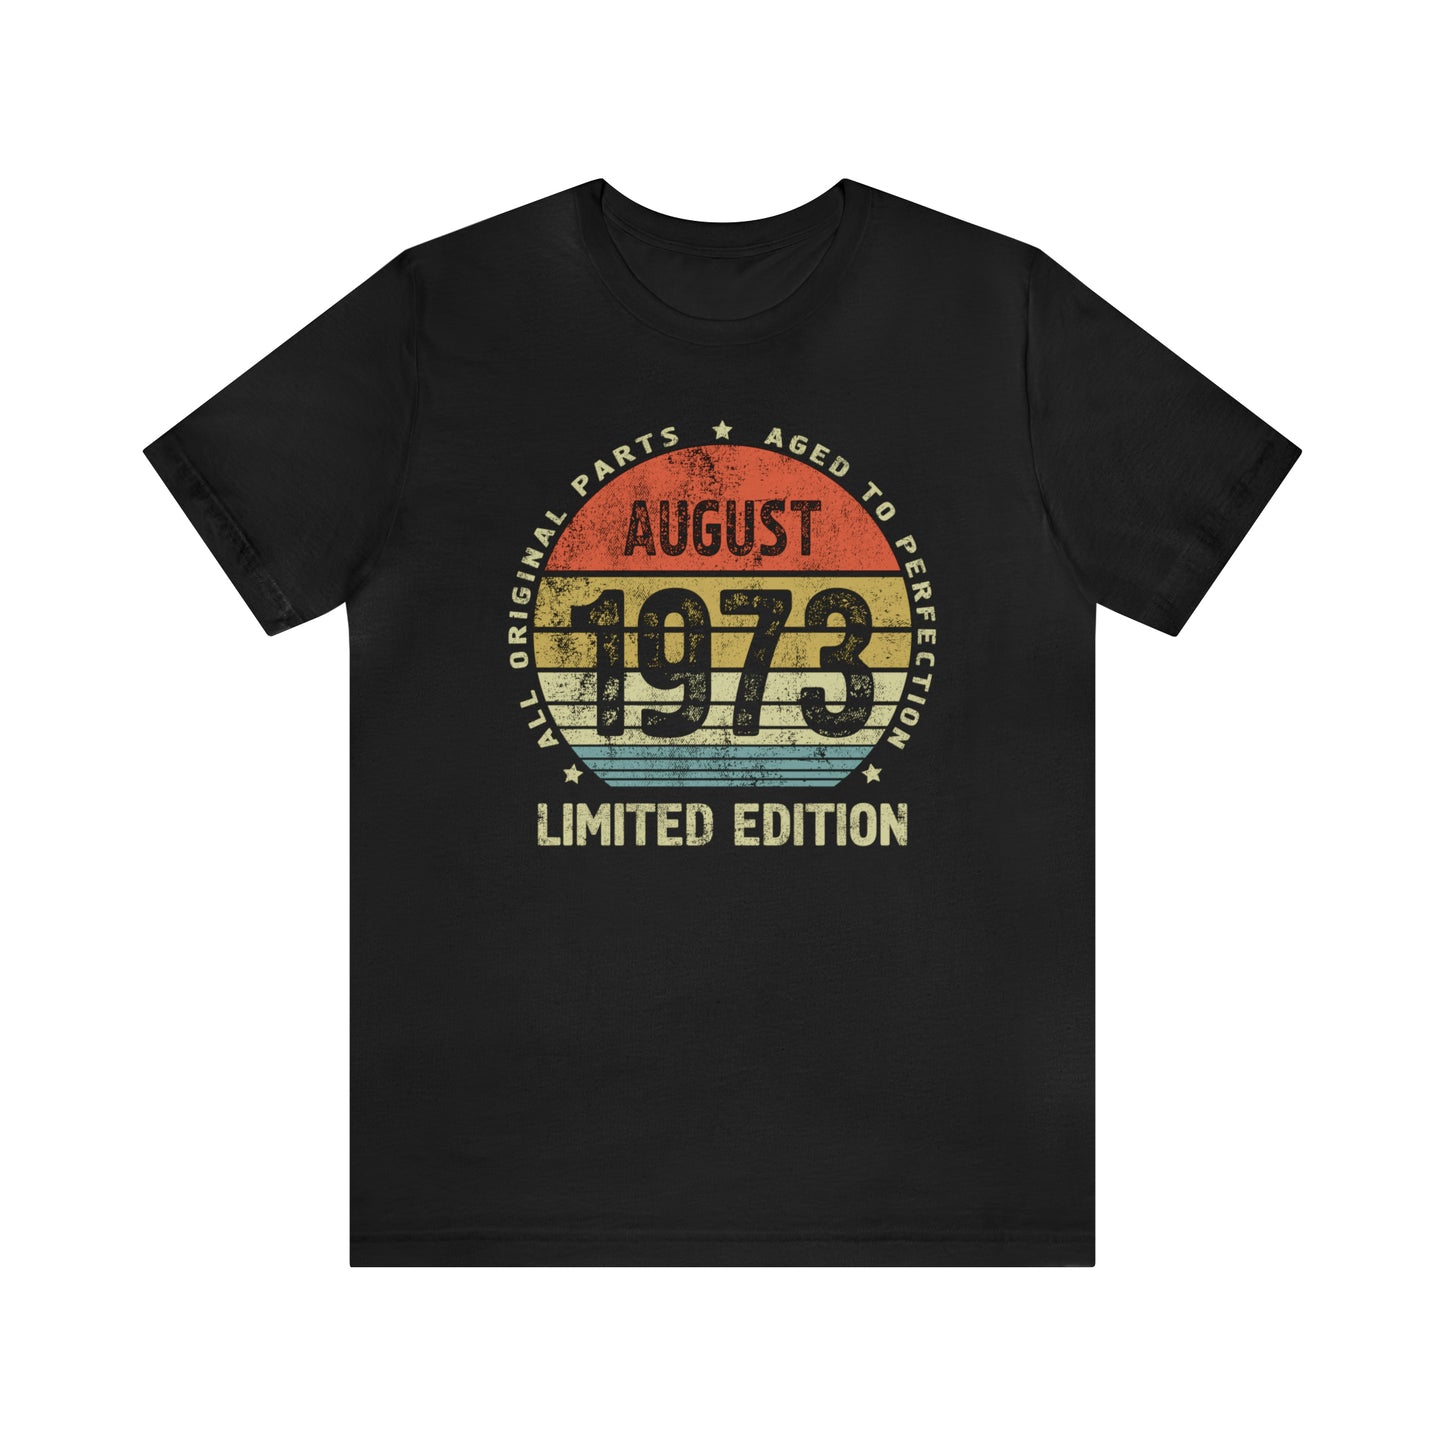 August 1973 birthday shirt for men or women, Gift shirt for sister or brother